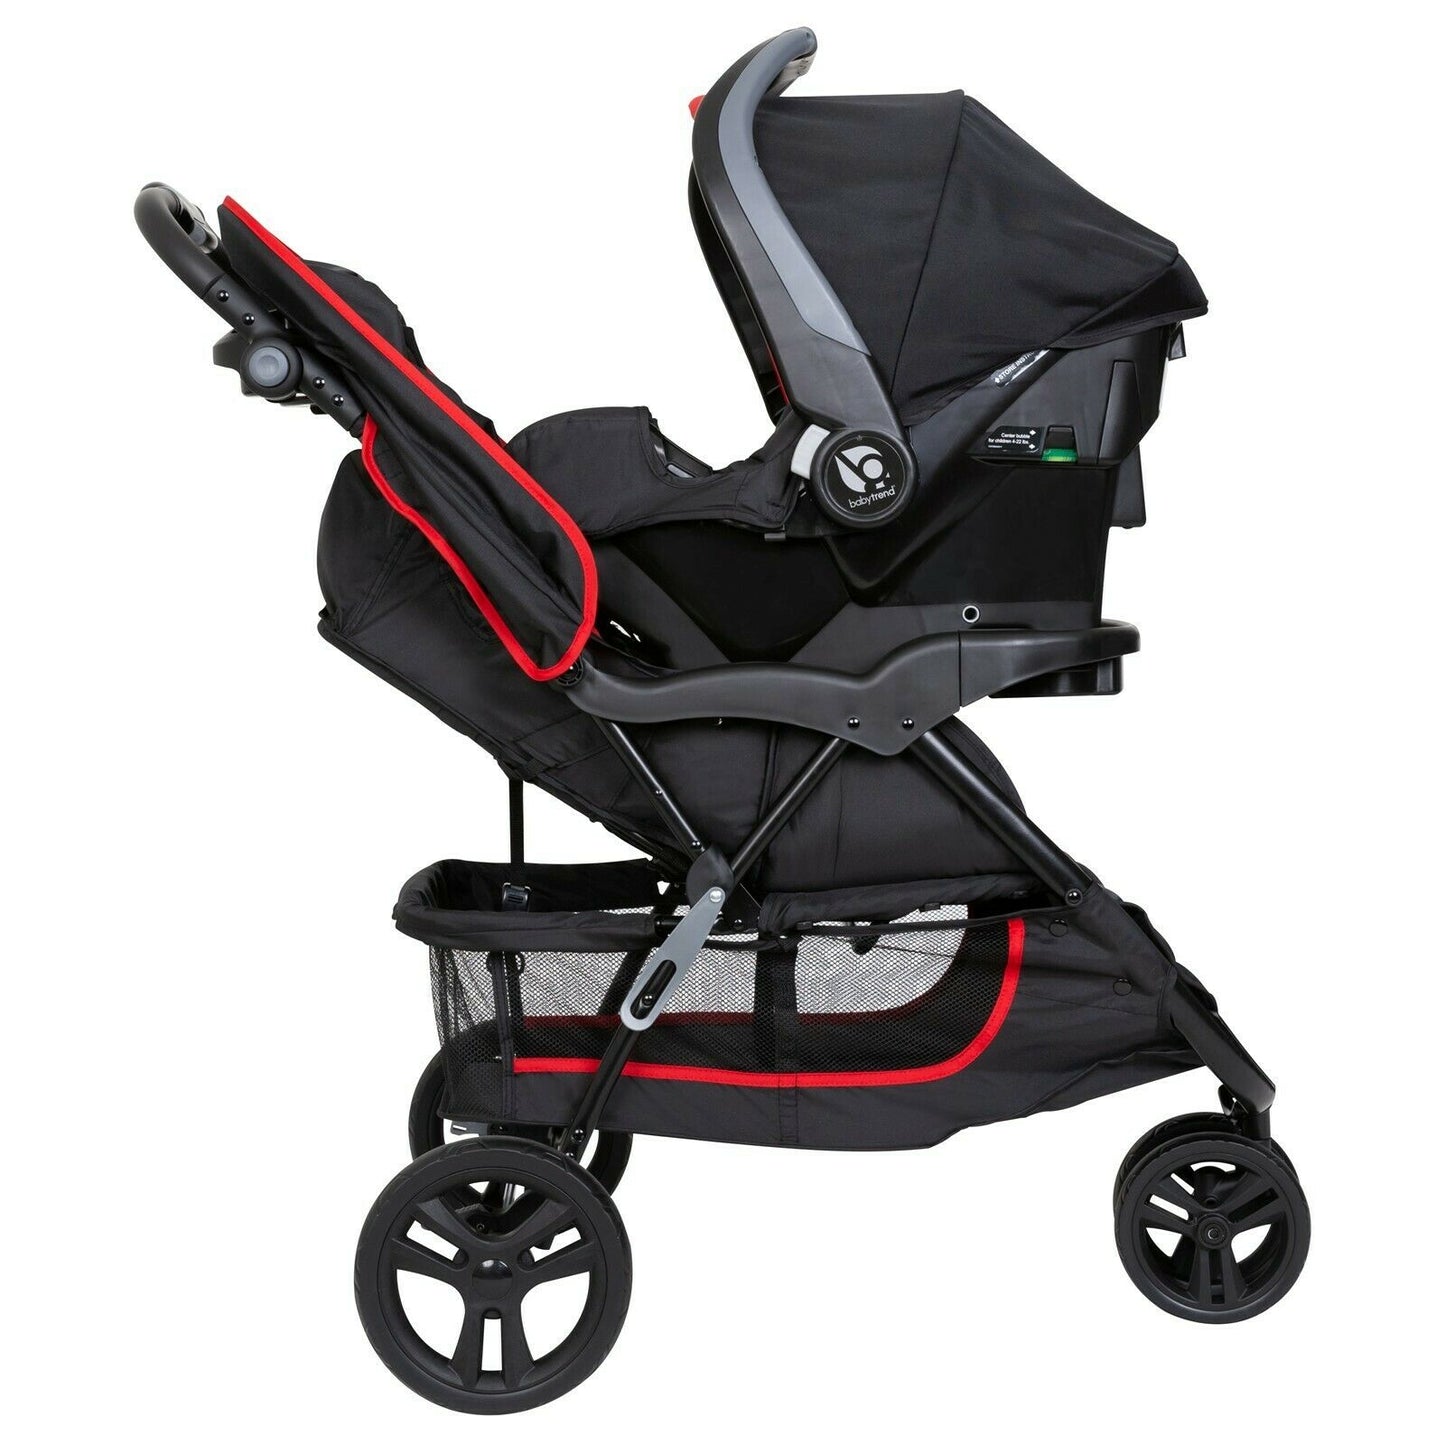 Baby Trend Stroller with Car Seat Infant Playard Travel System Combo